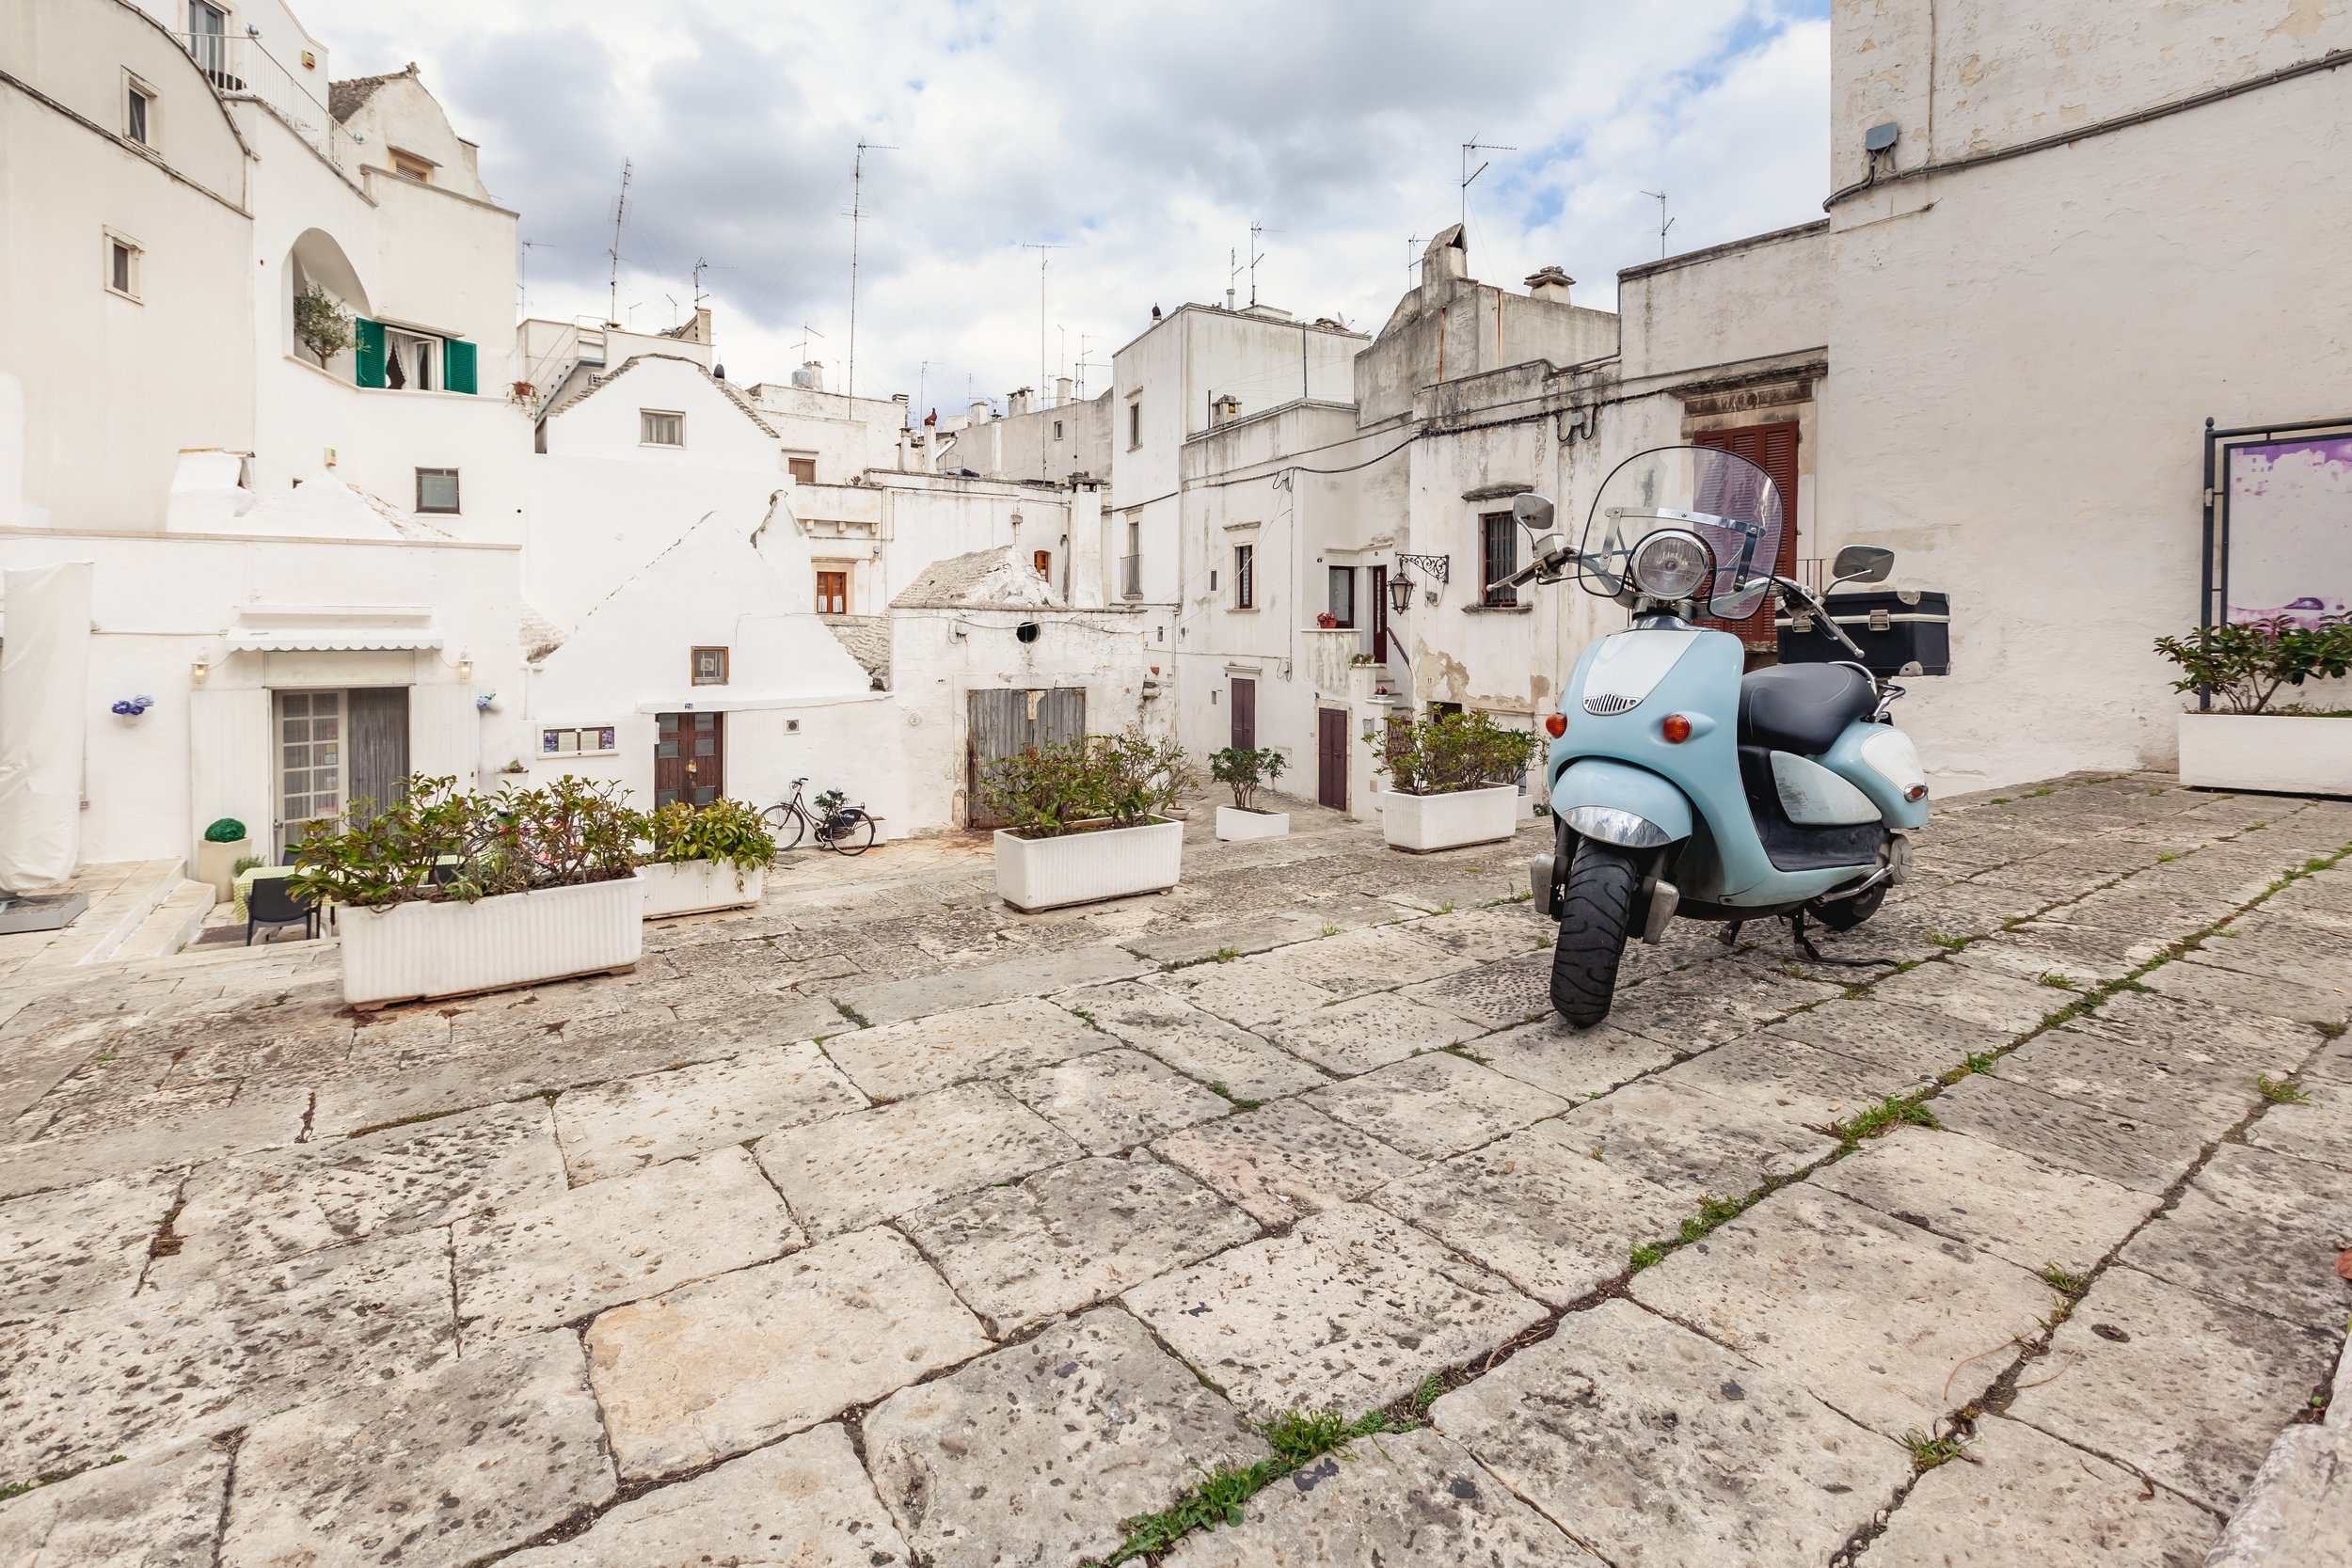 wonderful-view-empty-streets-old-town-martina-franca-with-beautiful-houses-painted-white-greenery-classic-blue-moped-background-anient-buildings-nice-day-touri.jpg